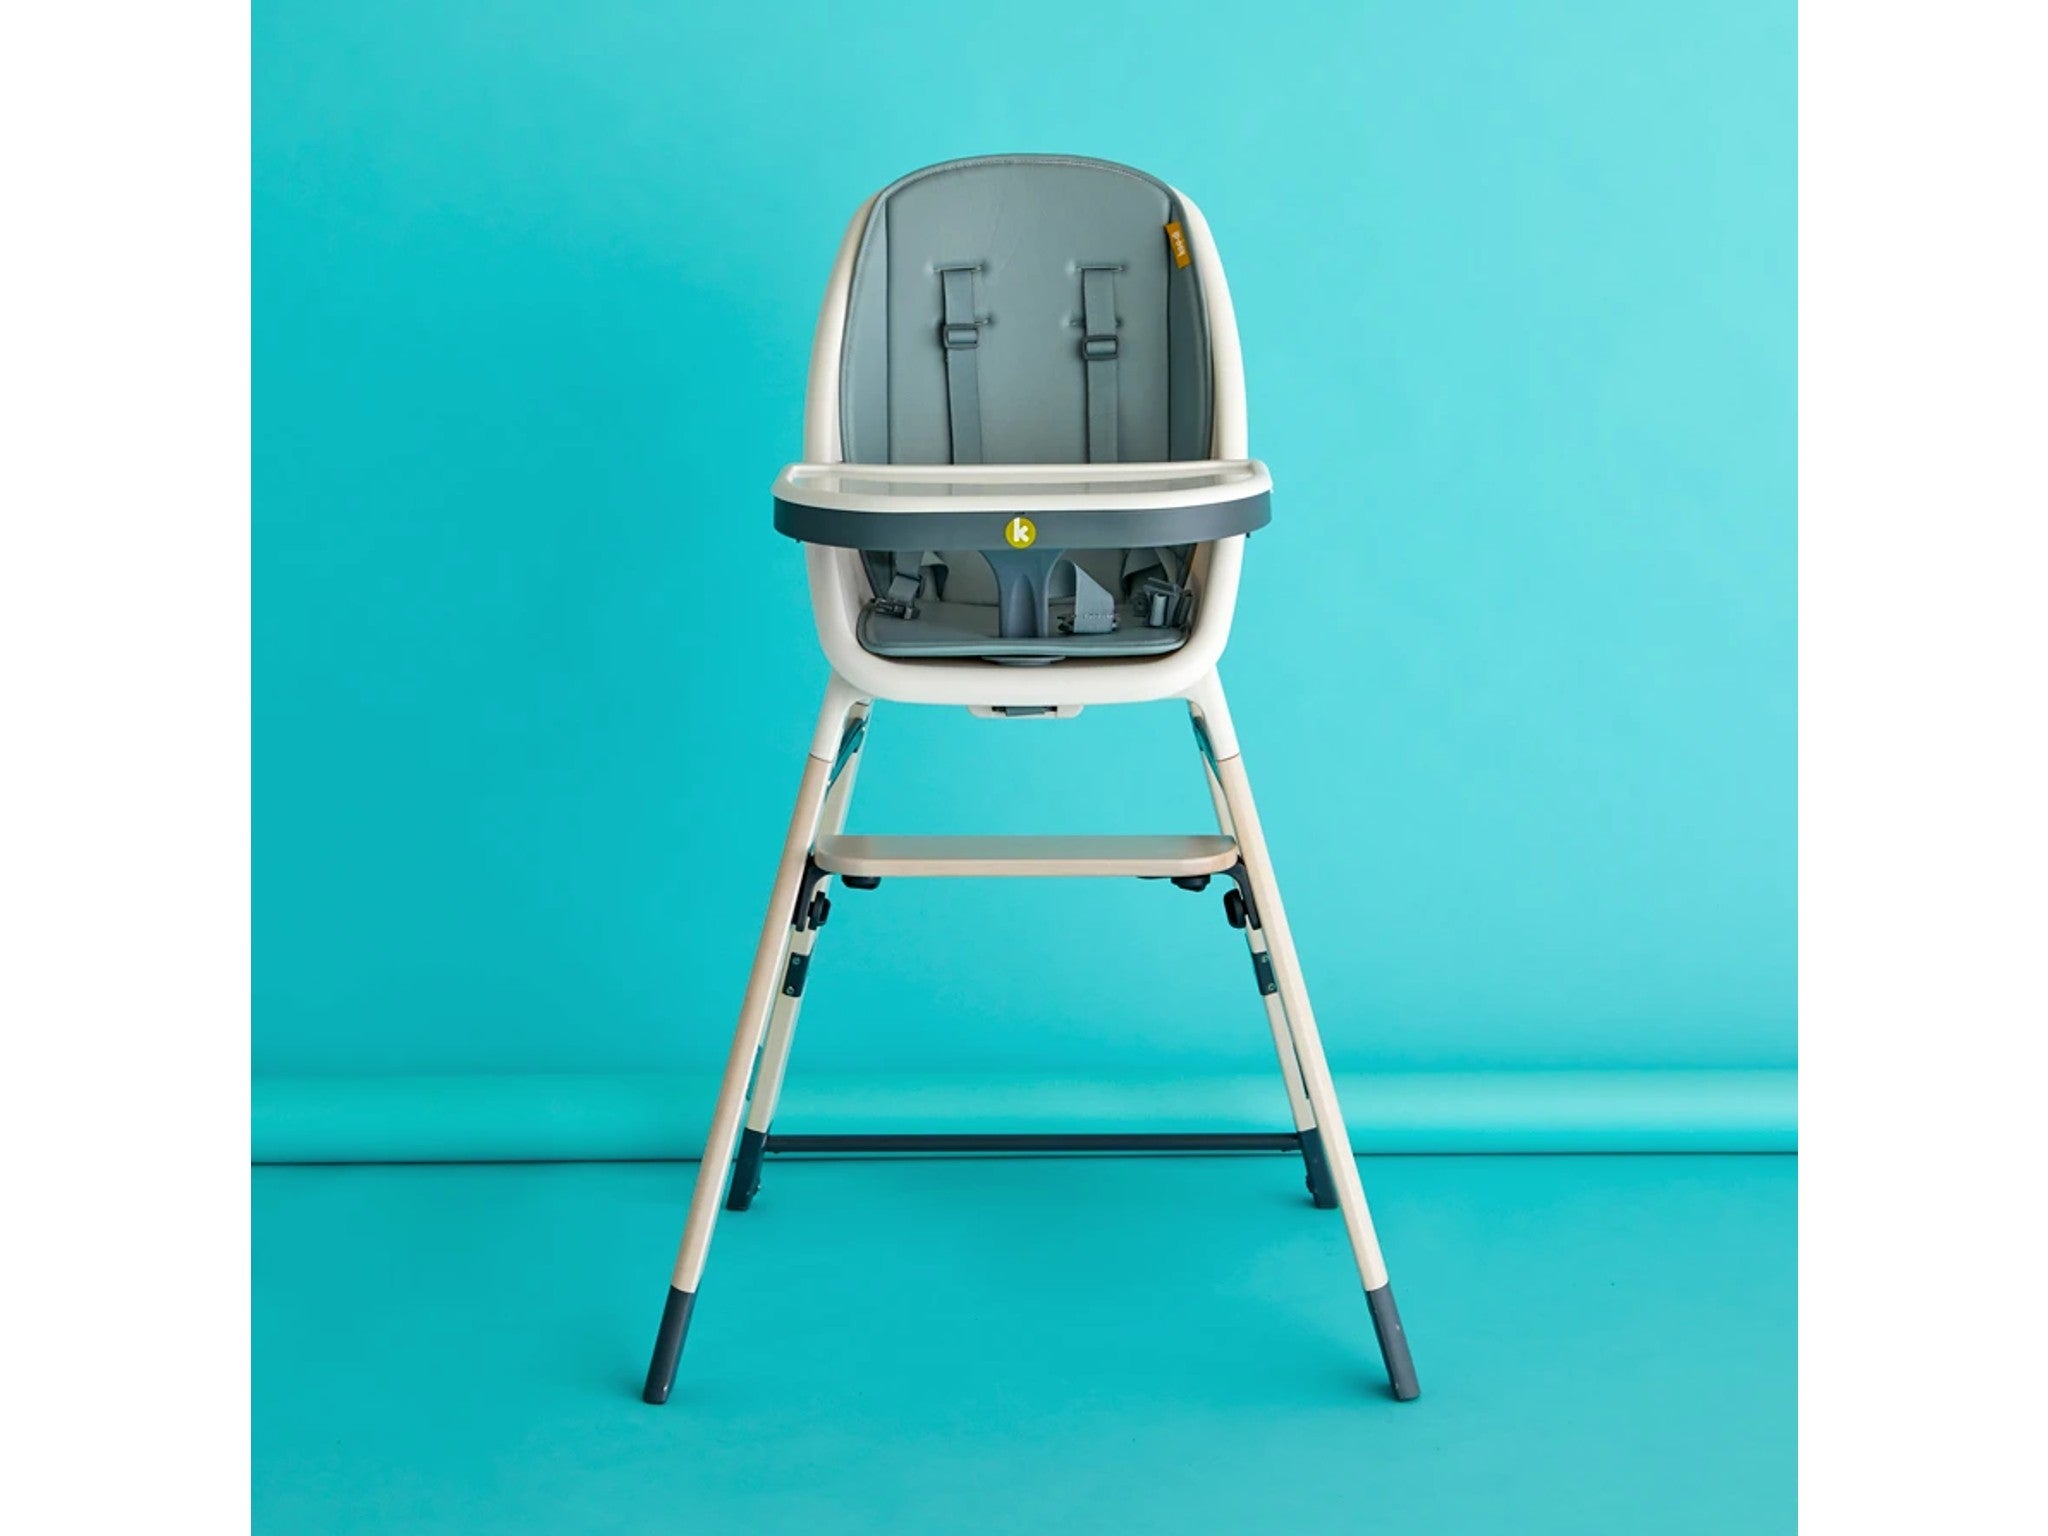 Koo-di tiny taster 3-in-1 highchair indybes